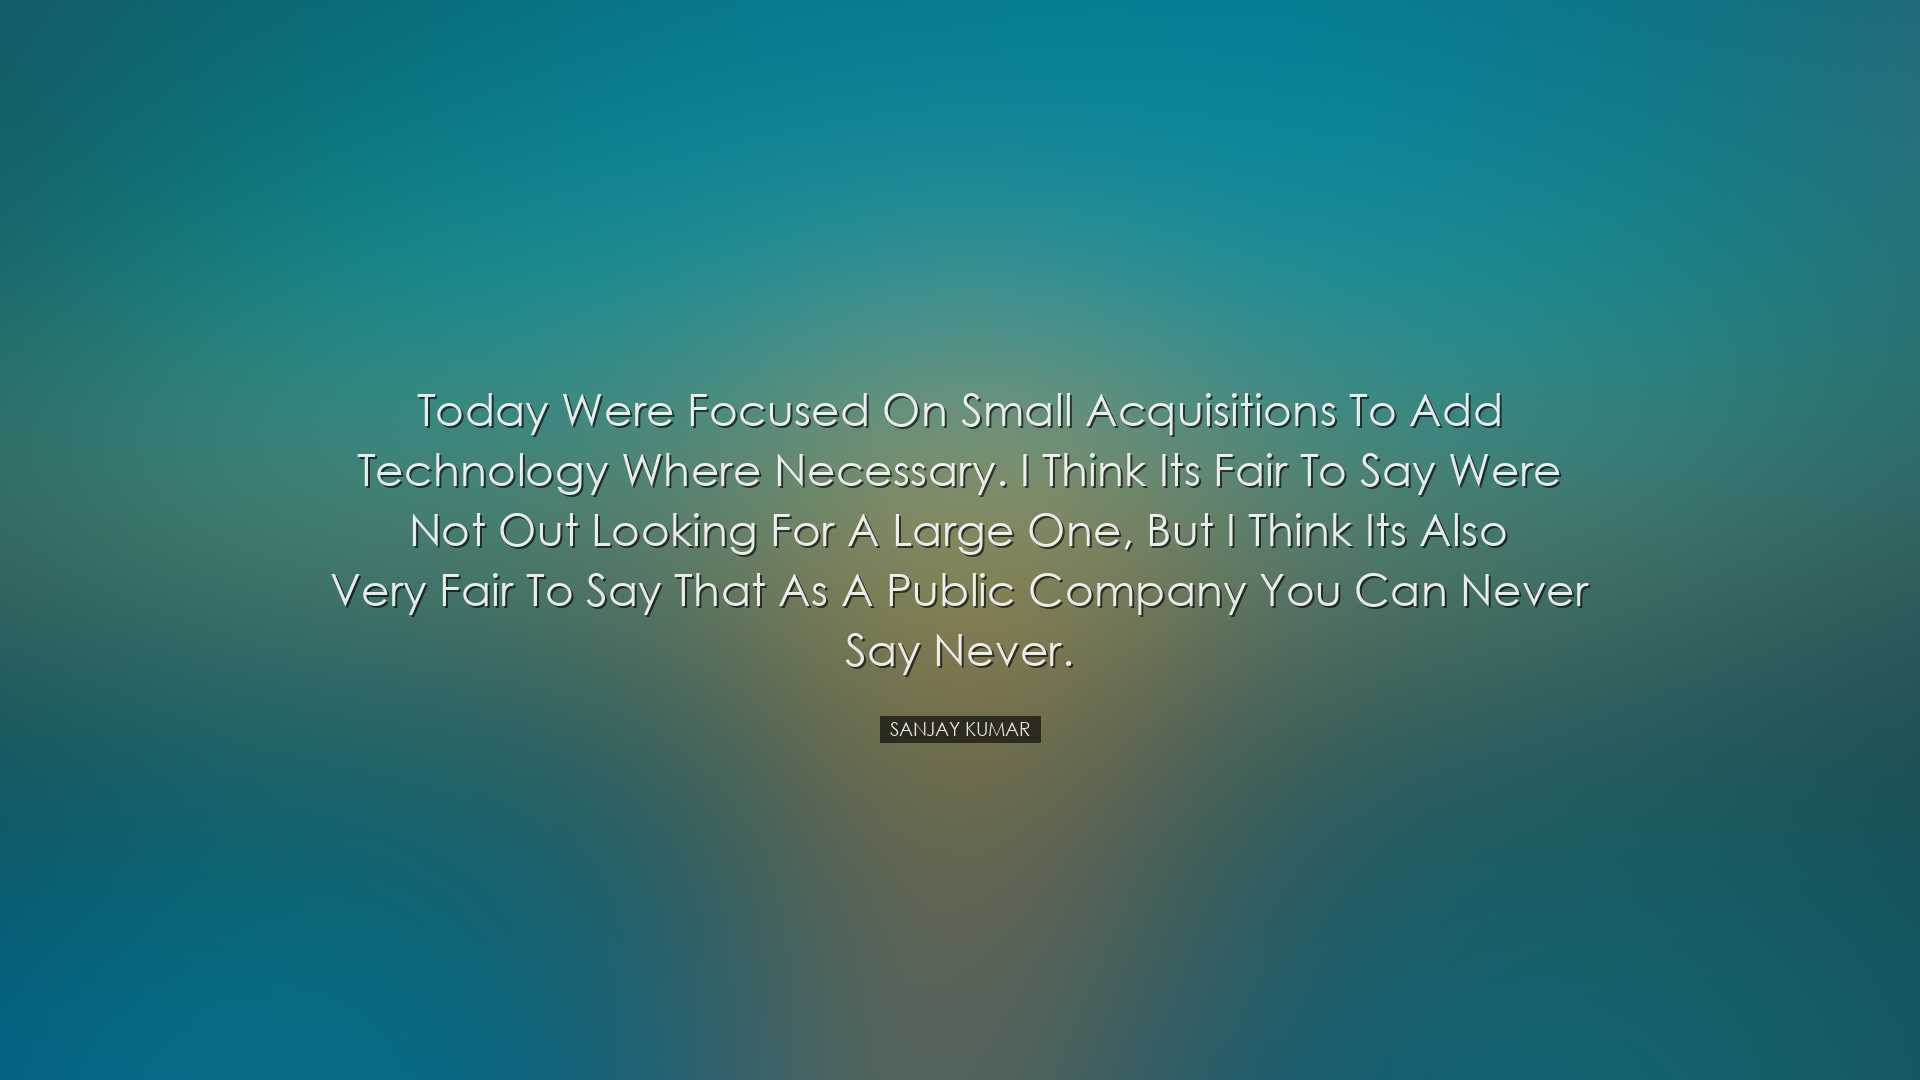 Today were focused on small acquisitions to add technology where n